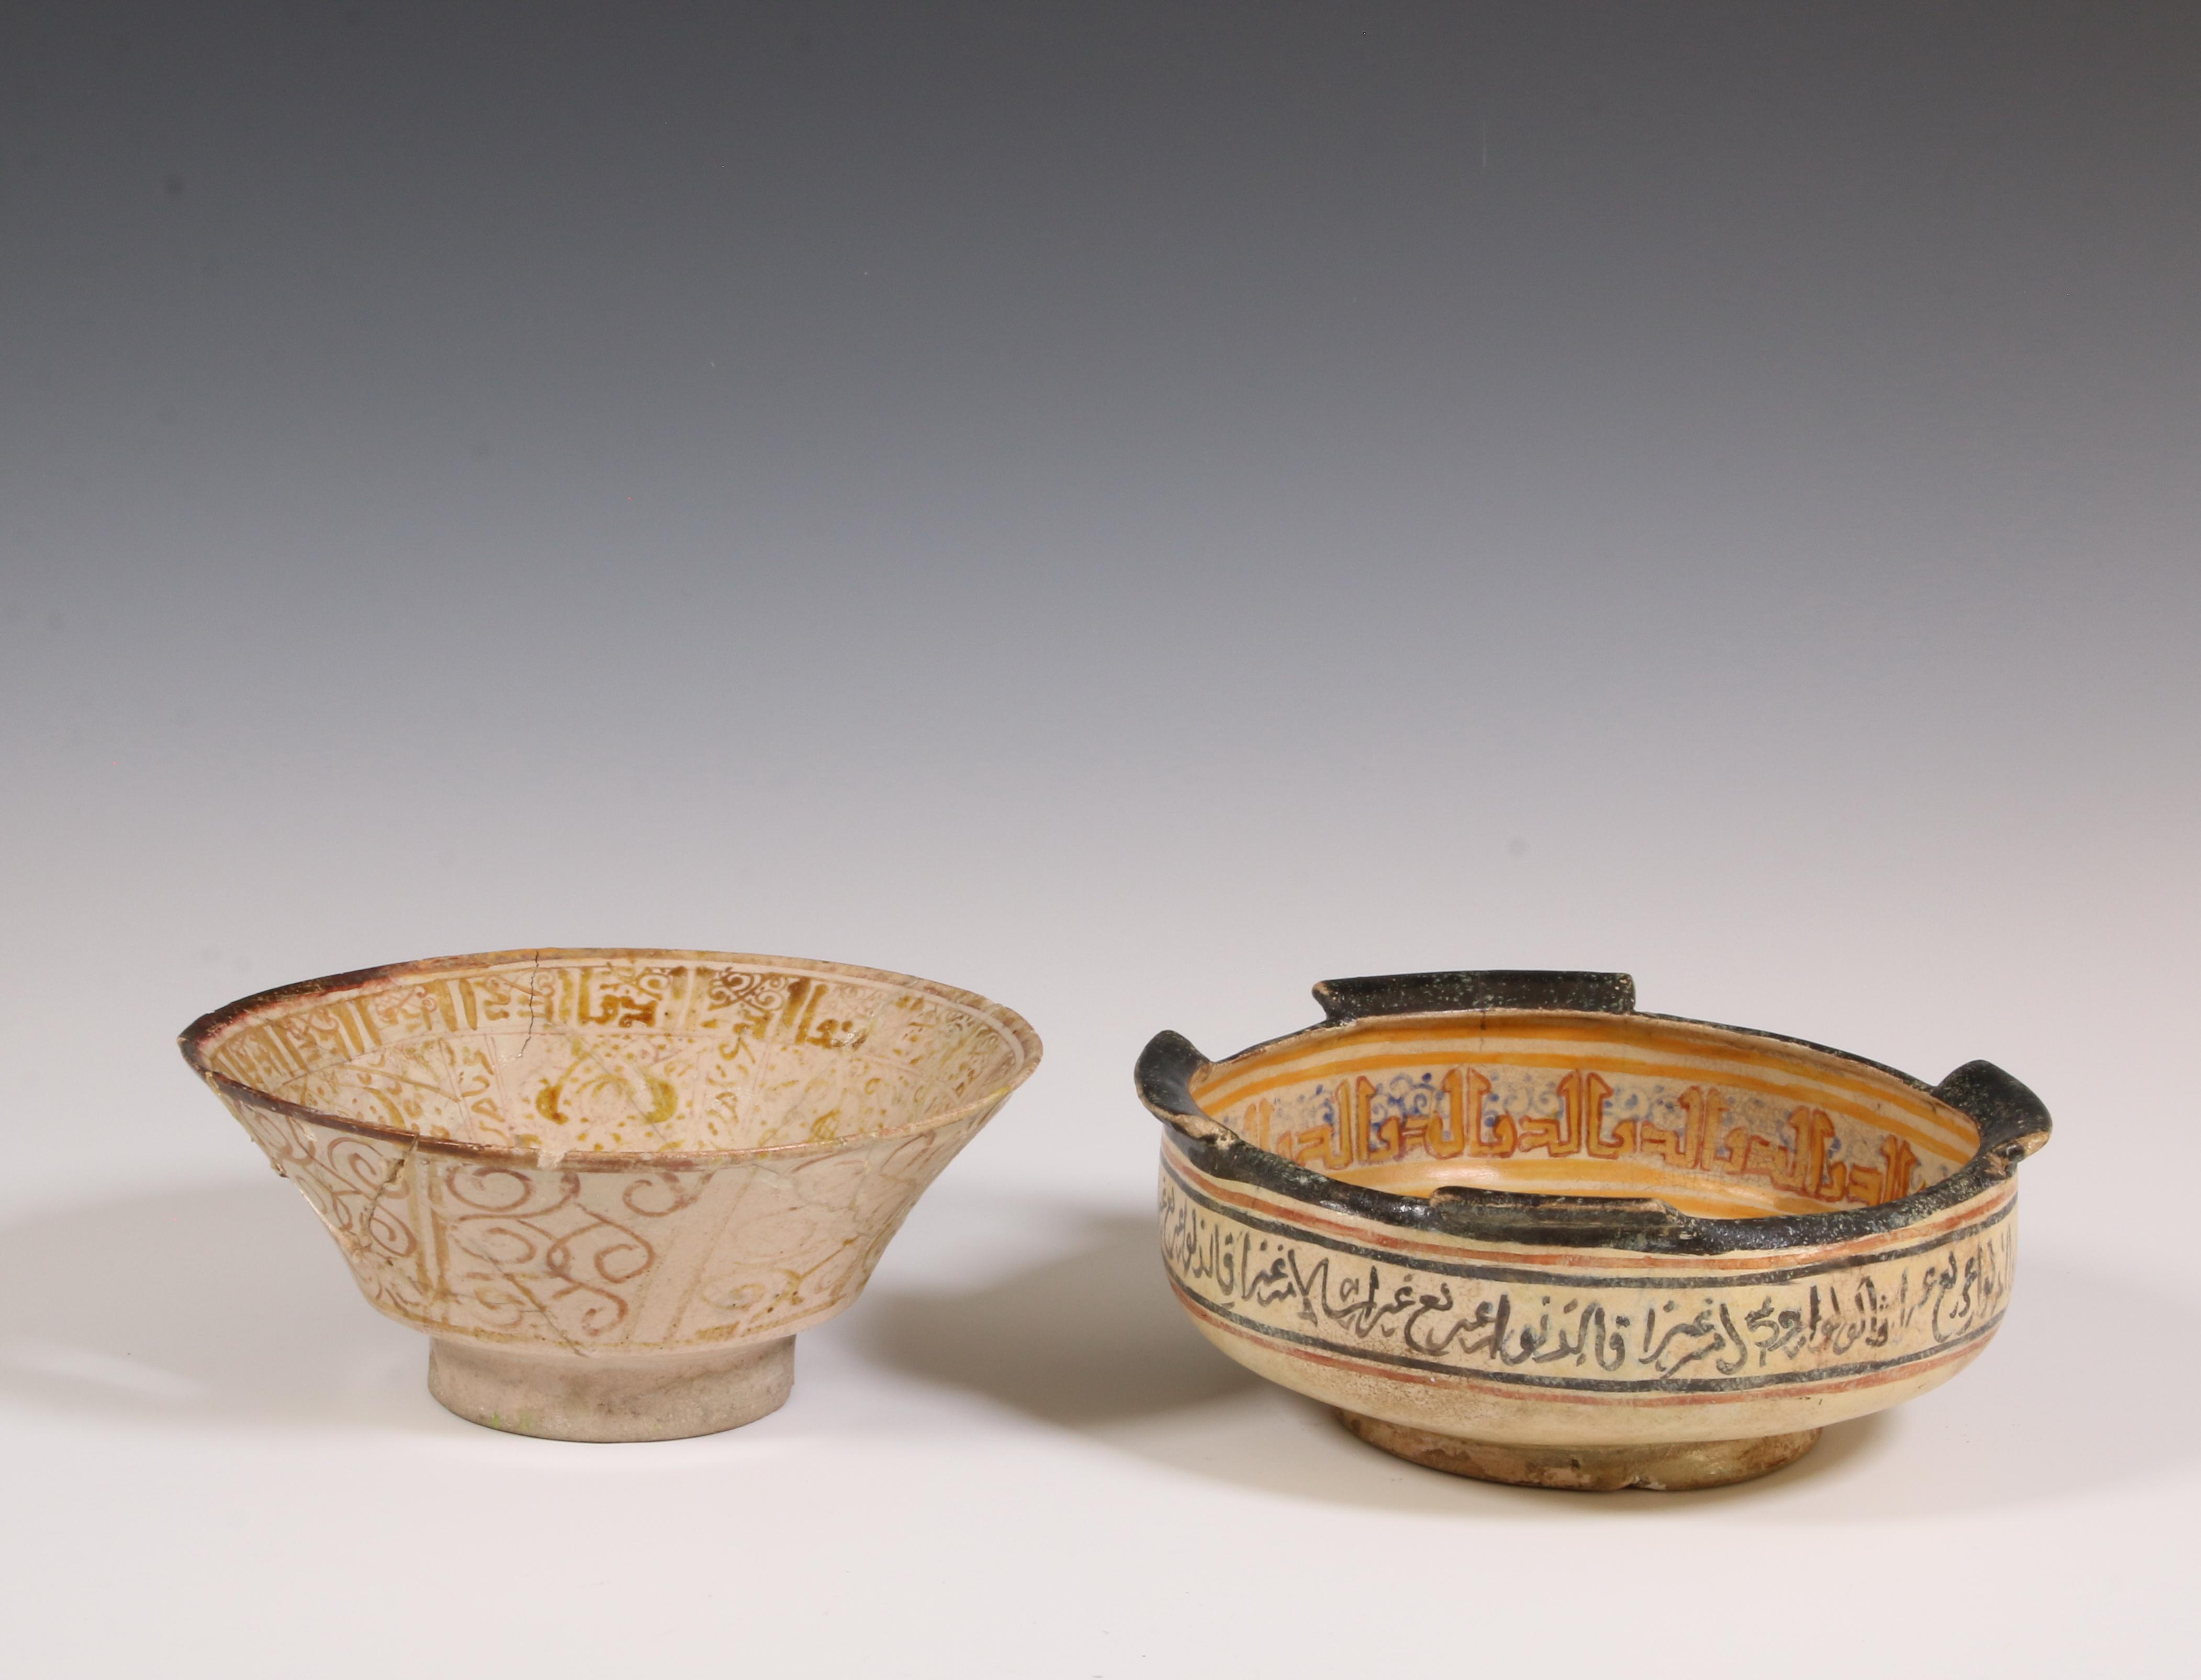 Persia, a minai pottery bowl, possibly 12th-13th century - Image 3 of 3